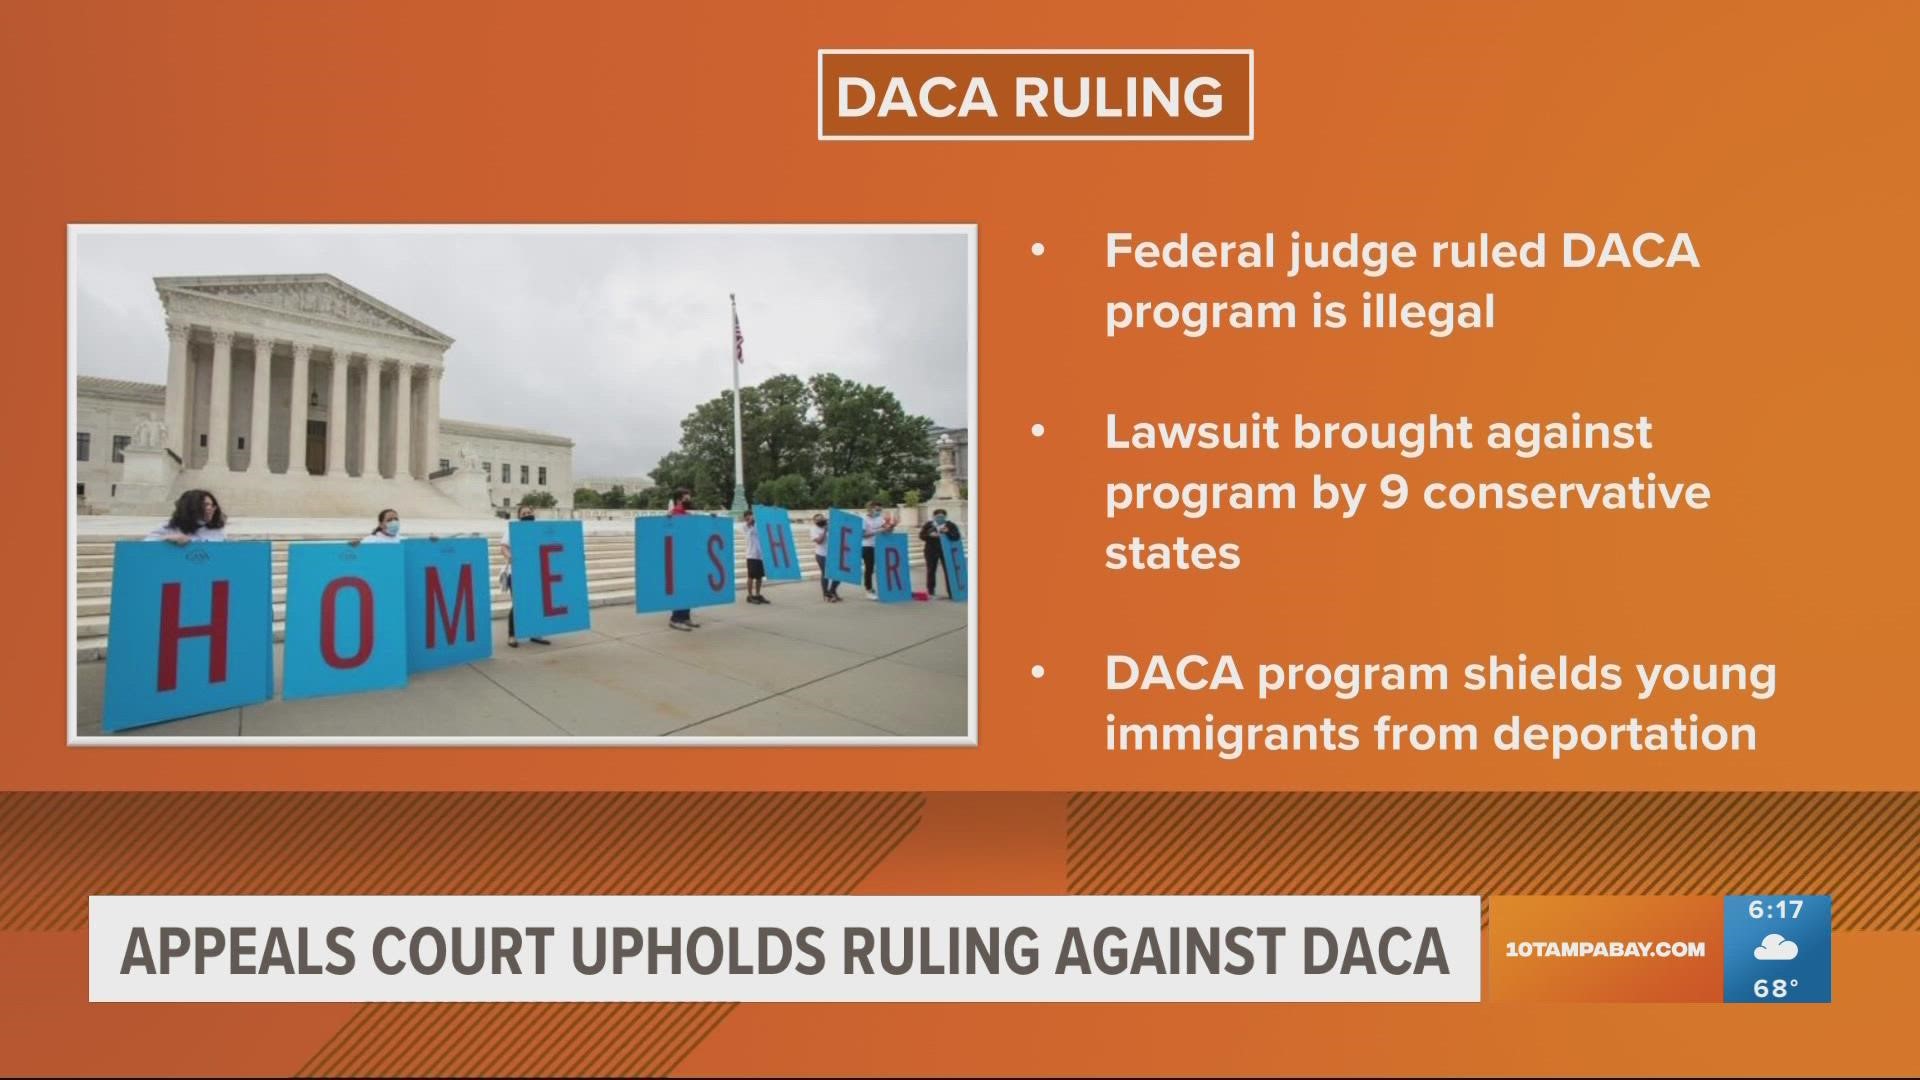 The ruling leaves the future of Deferred Action for Childhood Arrivals up in the air, with current DACA recipients protected — for now — but new applicants barred.